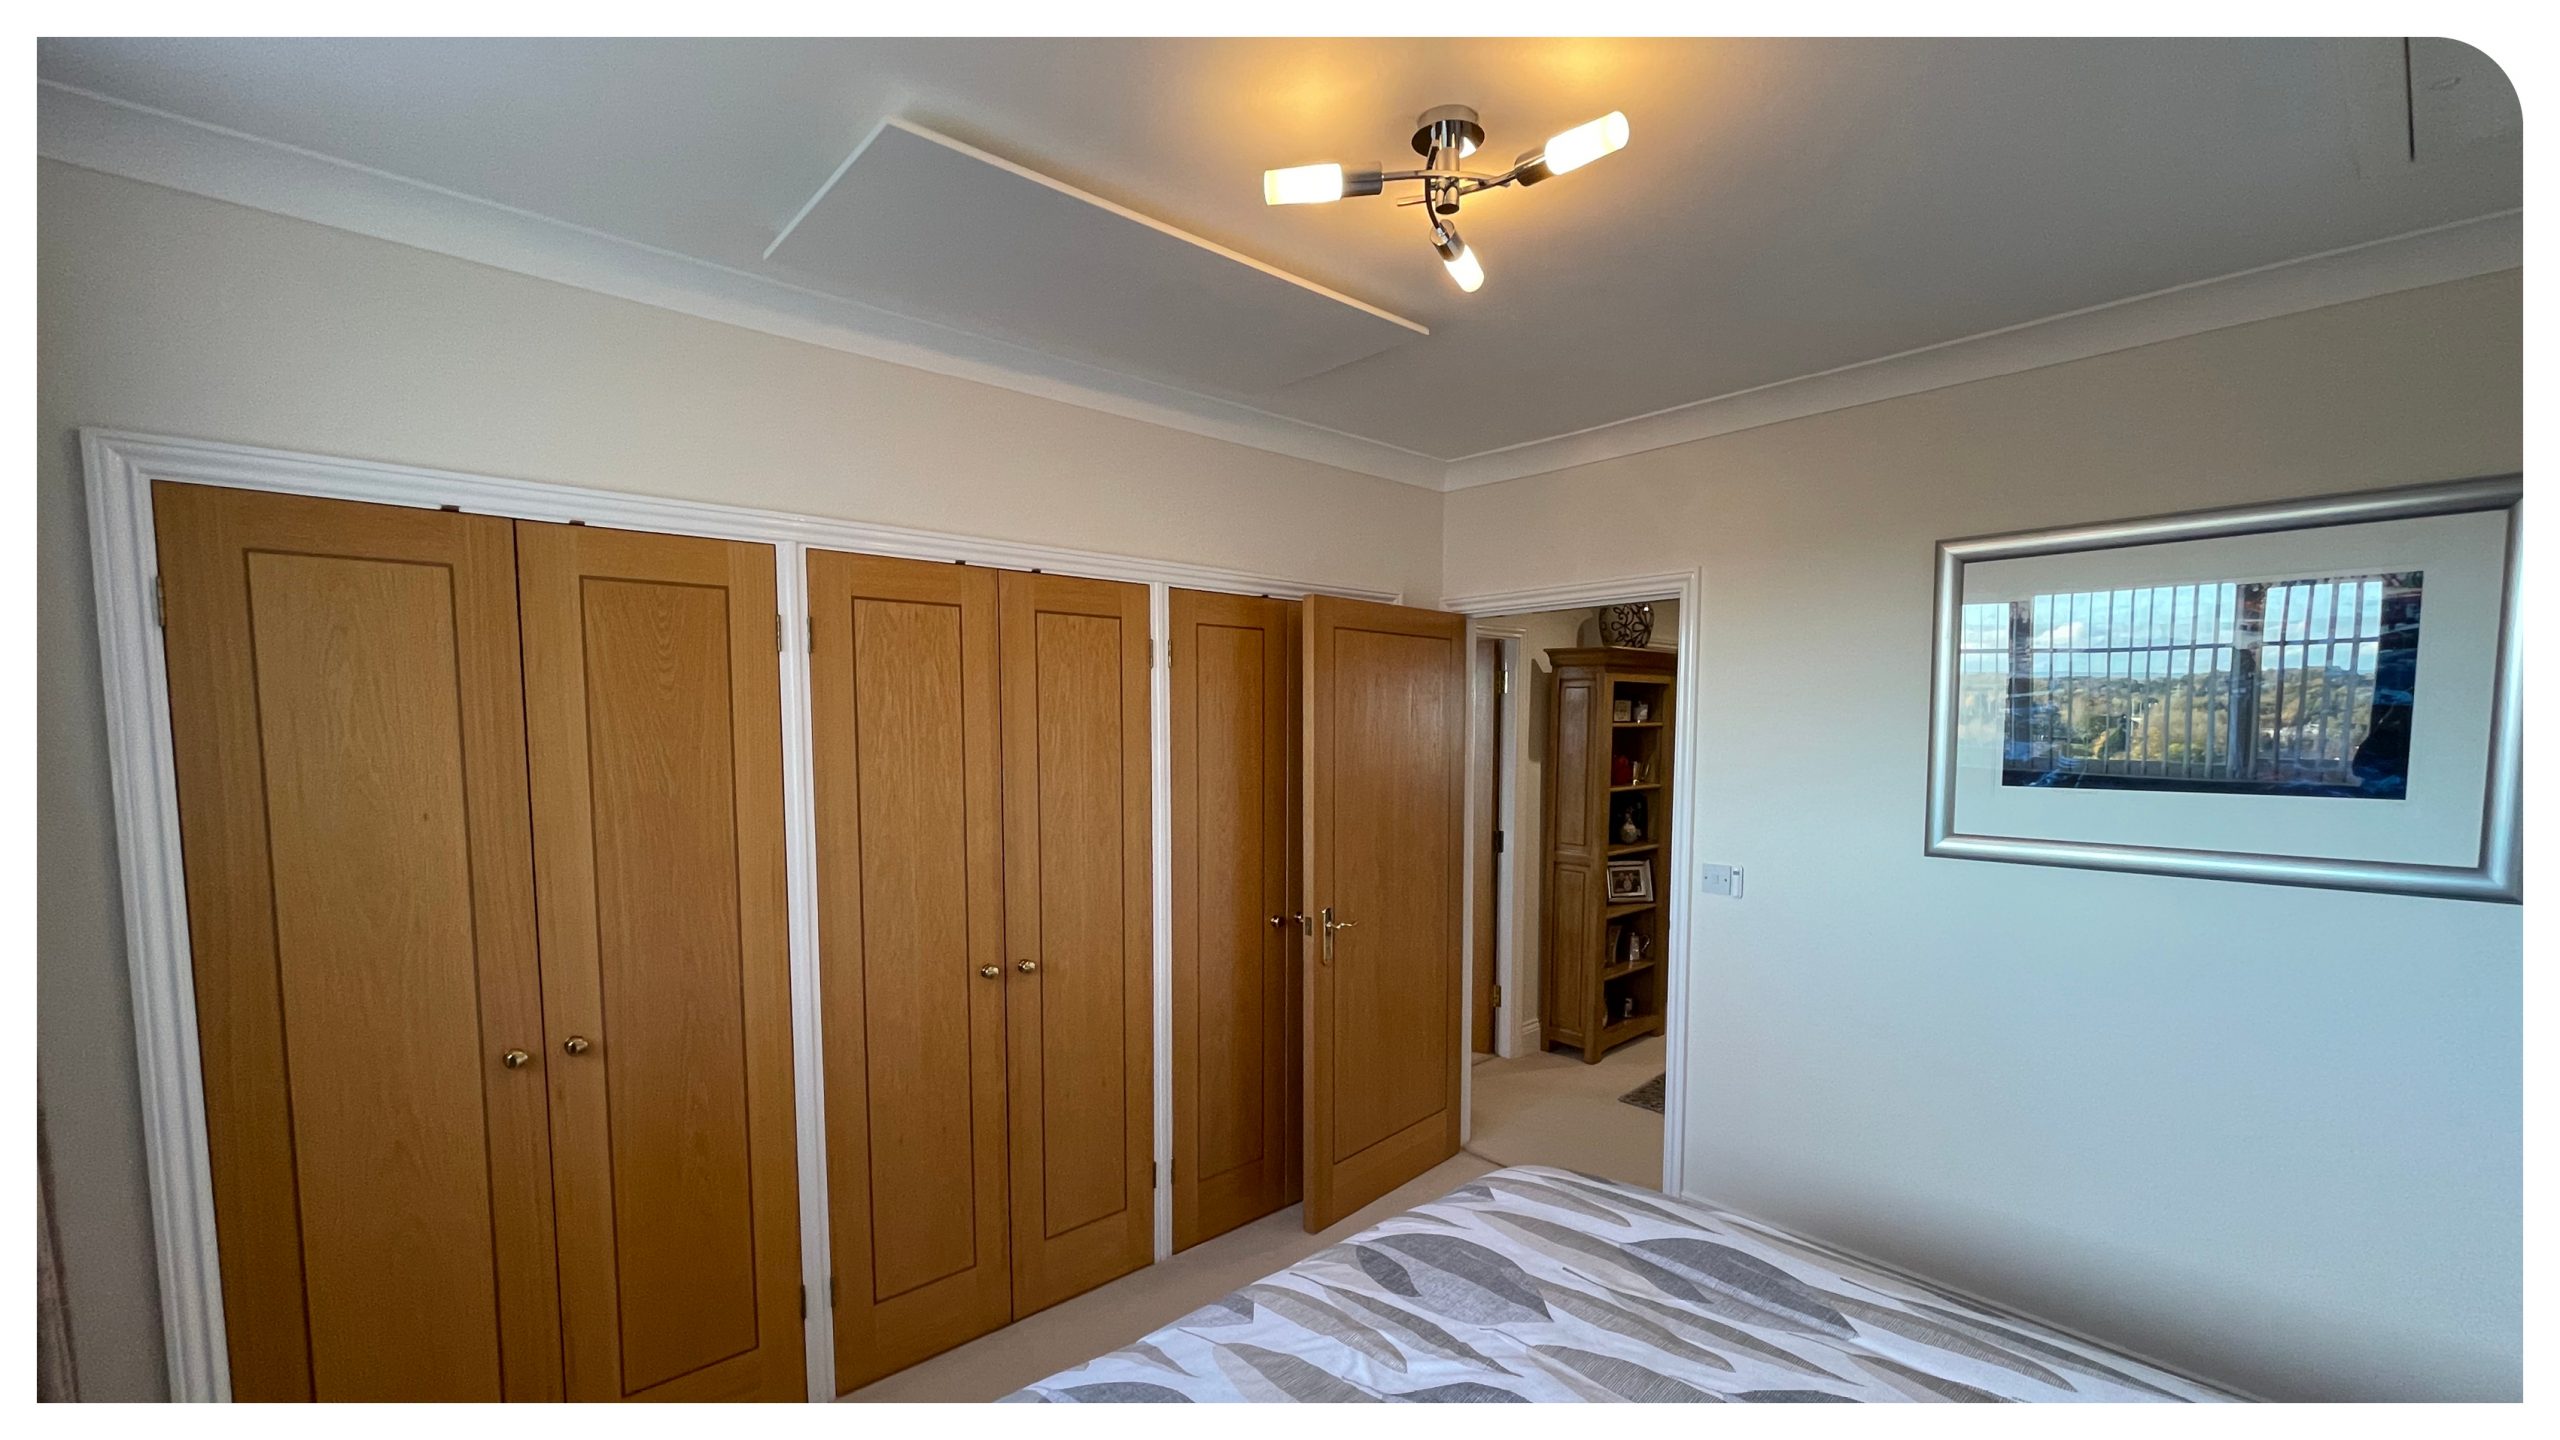 Jigsaw infrared case study with infrared heating panels